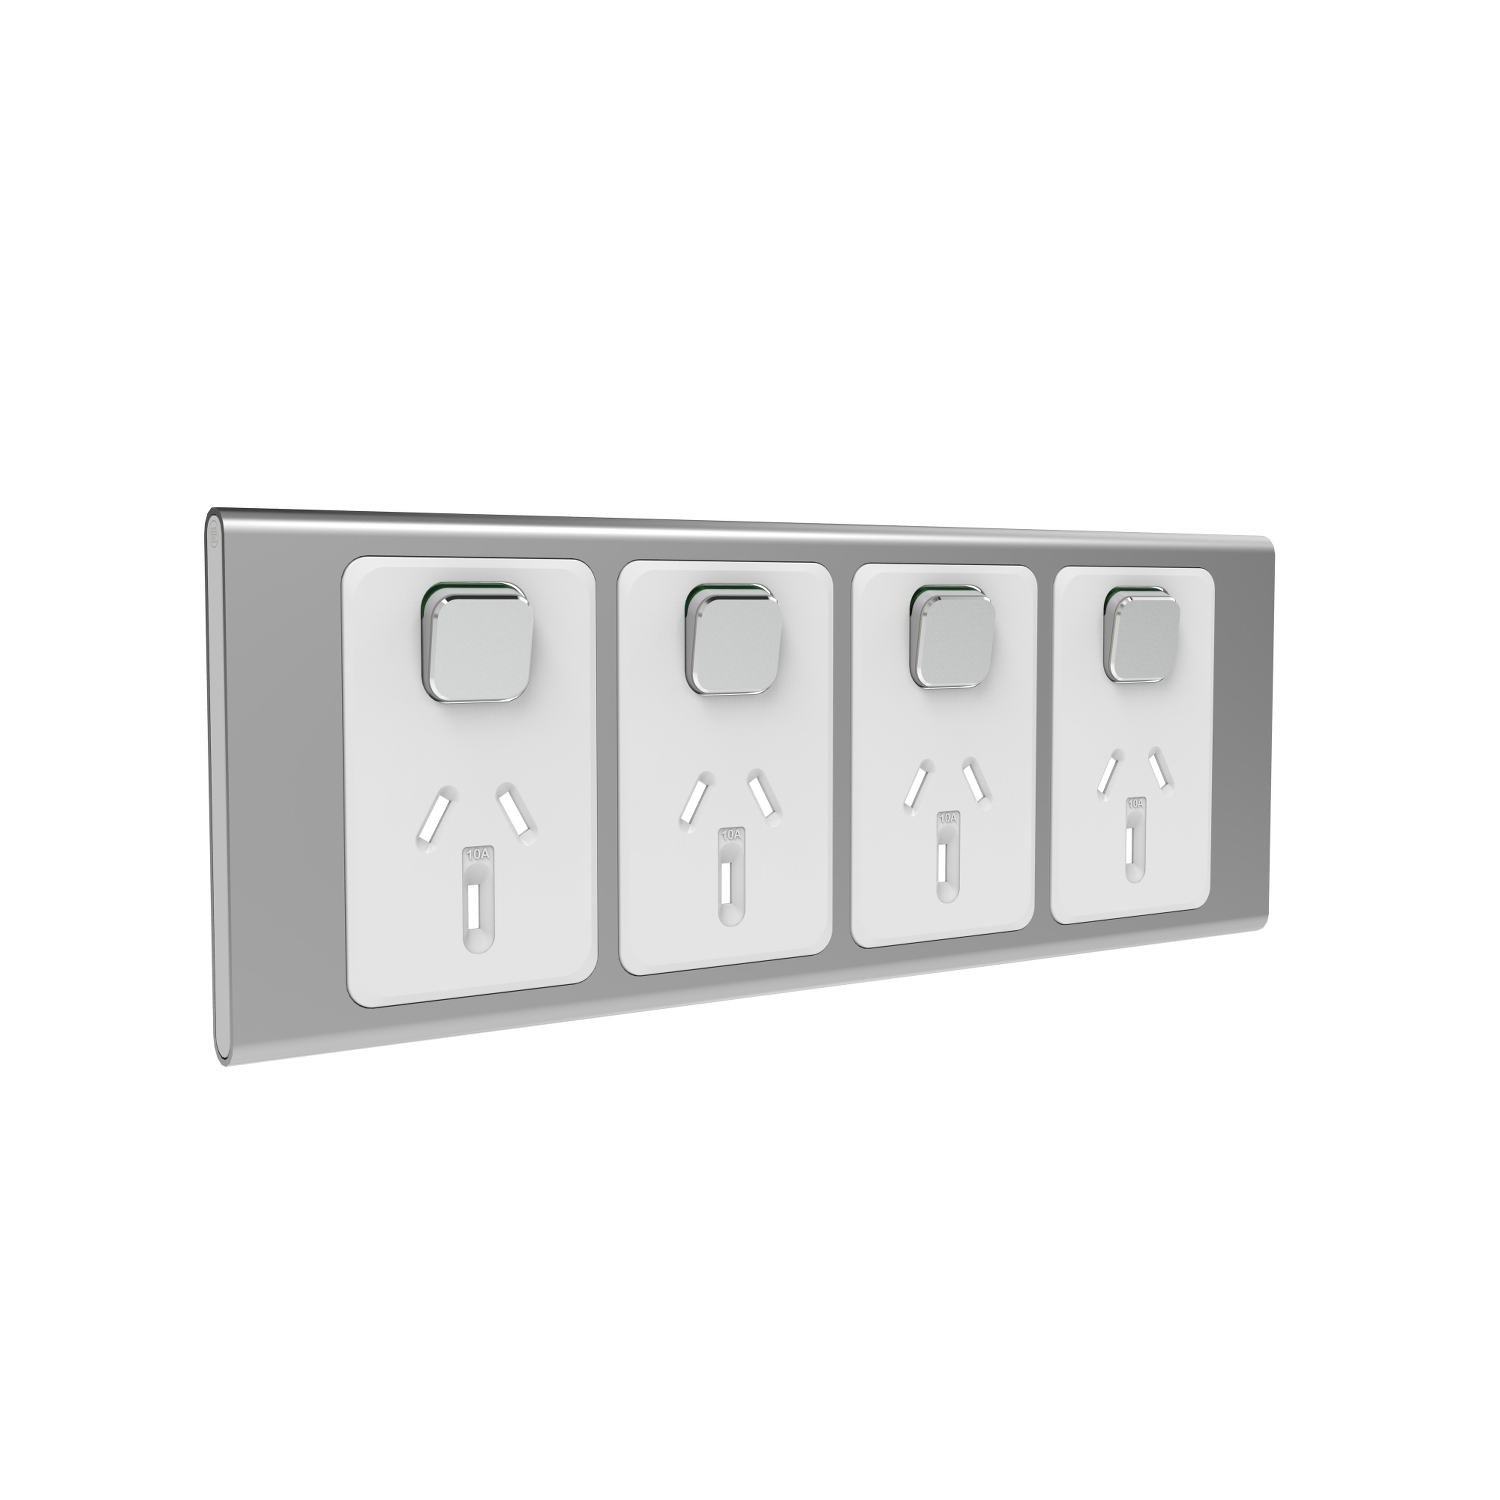 PDL Iconic Styl, cover frame, 4 switches & 4 sockets, horizontal - Silver